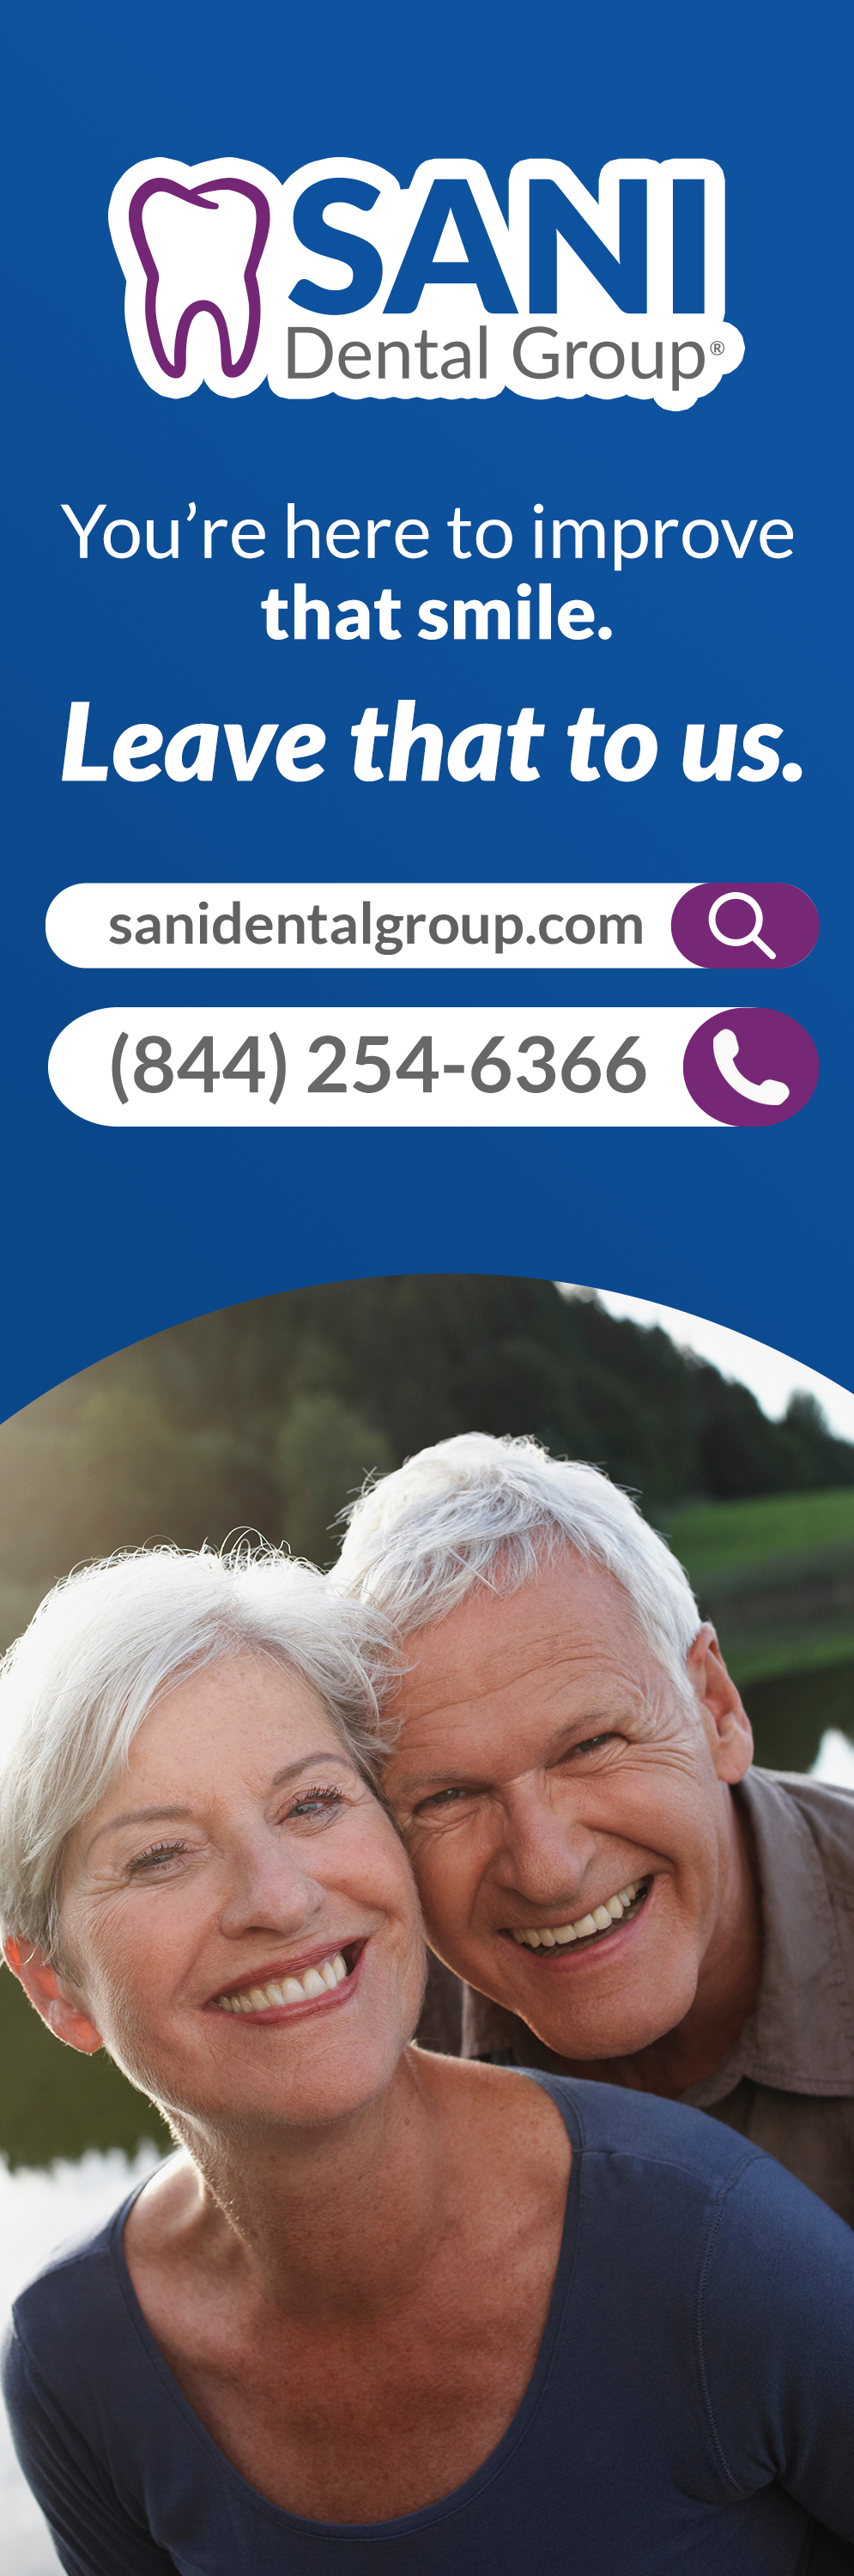 SANI DENTAL GROUP-Our doctor’s team has specialized in Laser dentistry, Oral surgery, Dental Implantology, Cosmetic Dentistry, Orthodontics, Endodontics, Periodontics, Health services administration, among other dental treatments you may need. Your dental treatment can be performed by one, two, three, or more doctors. You will be seen by a specialist for each treatment you require.